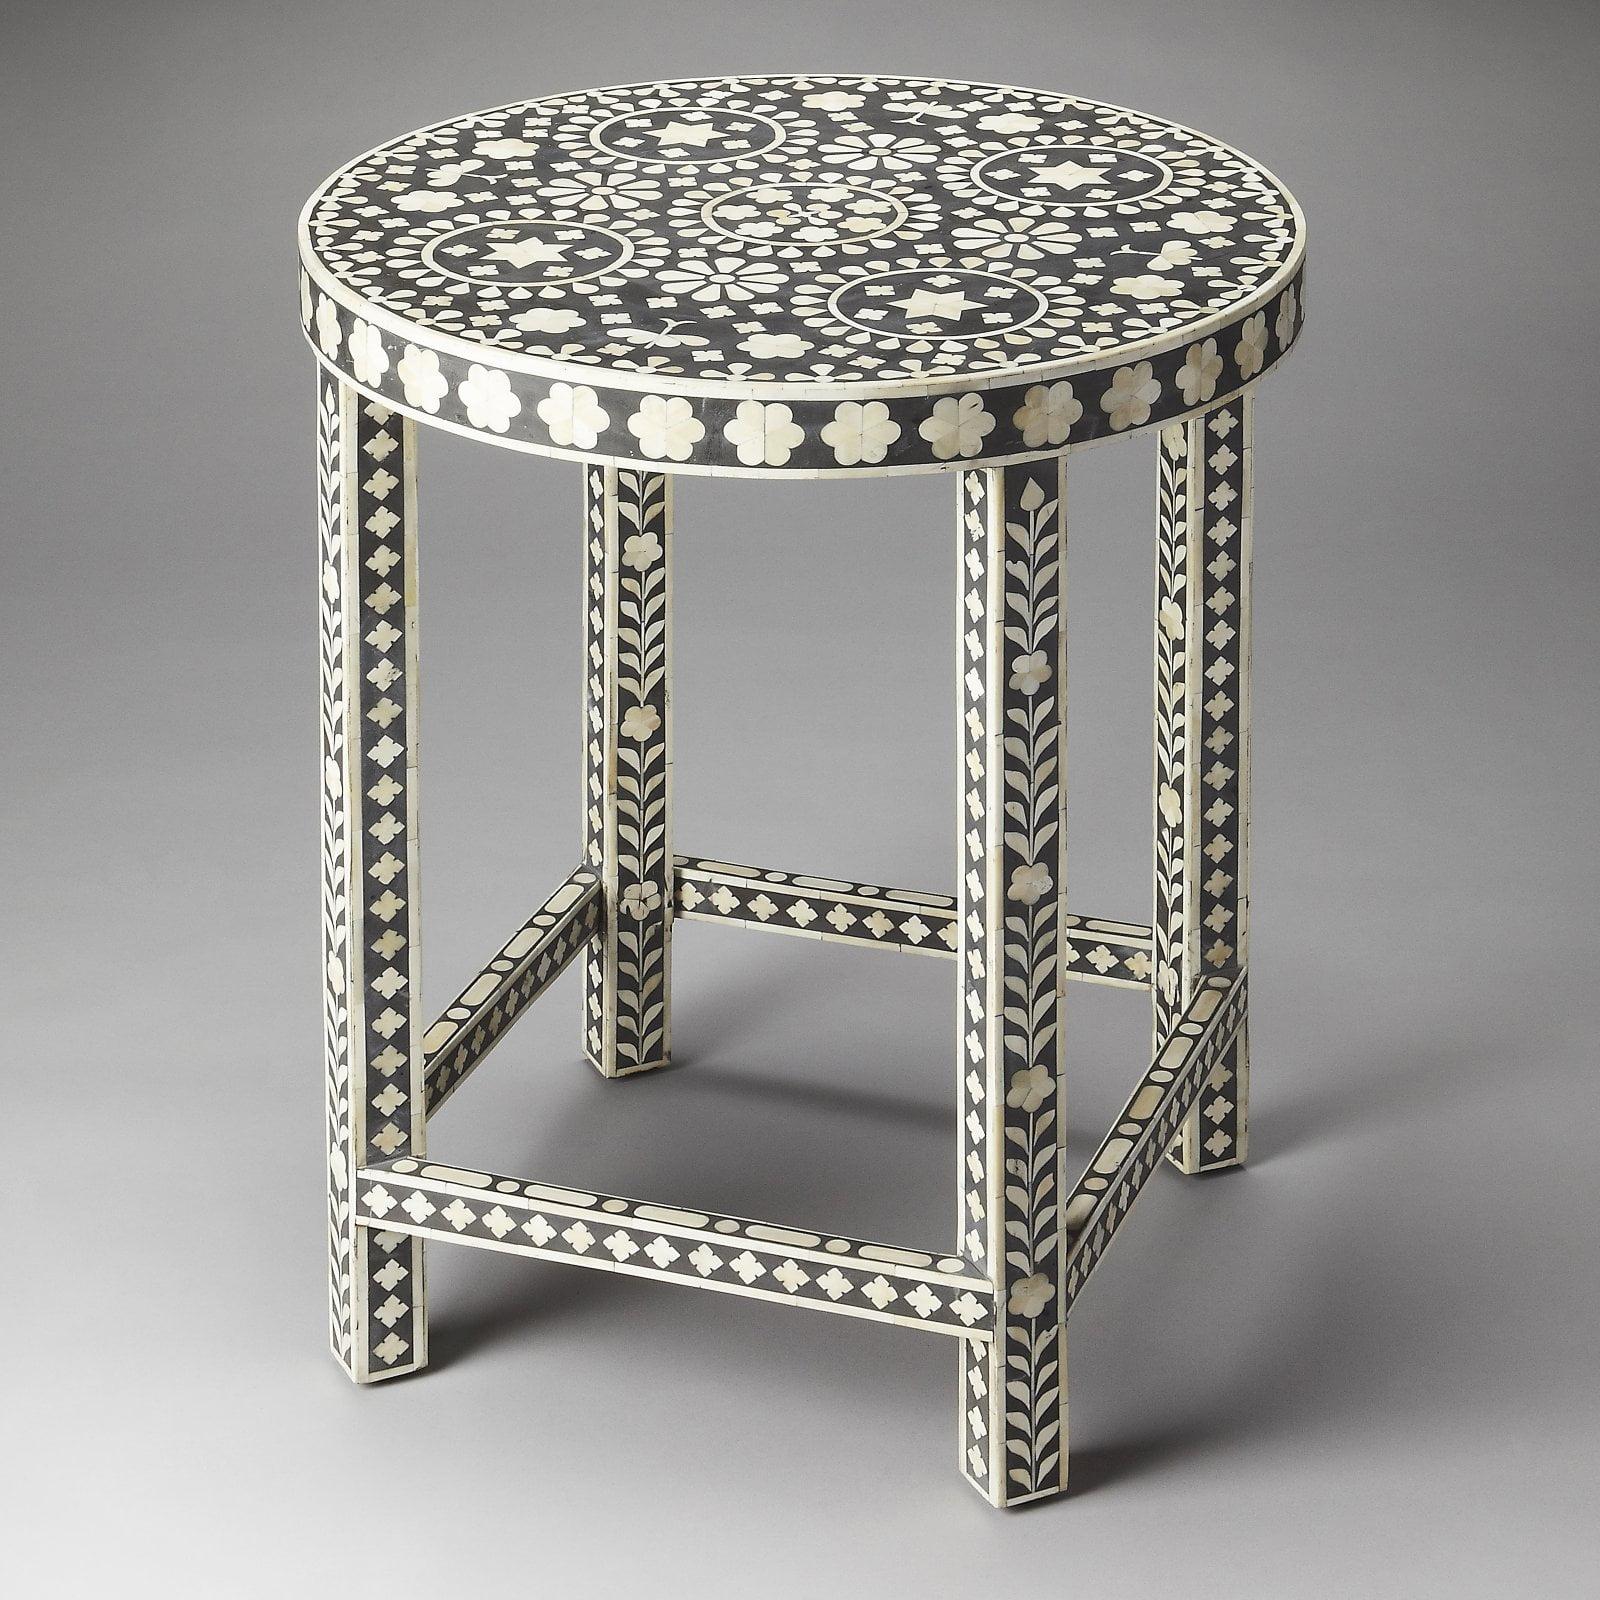 Moroccan Princess Round Black and White Bone Inlay Accent Table